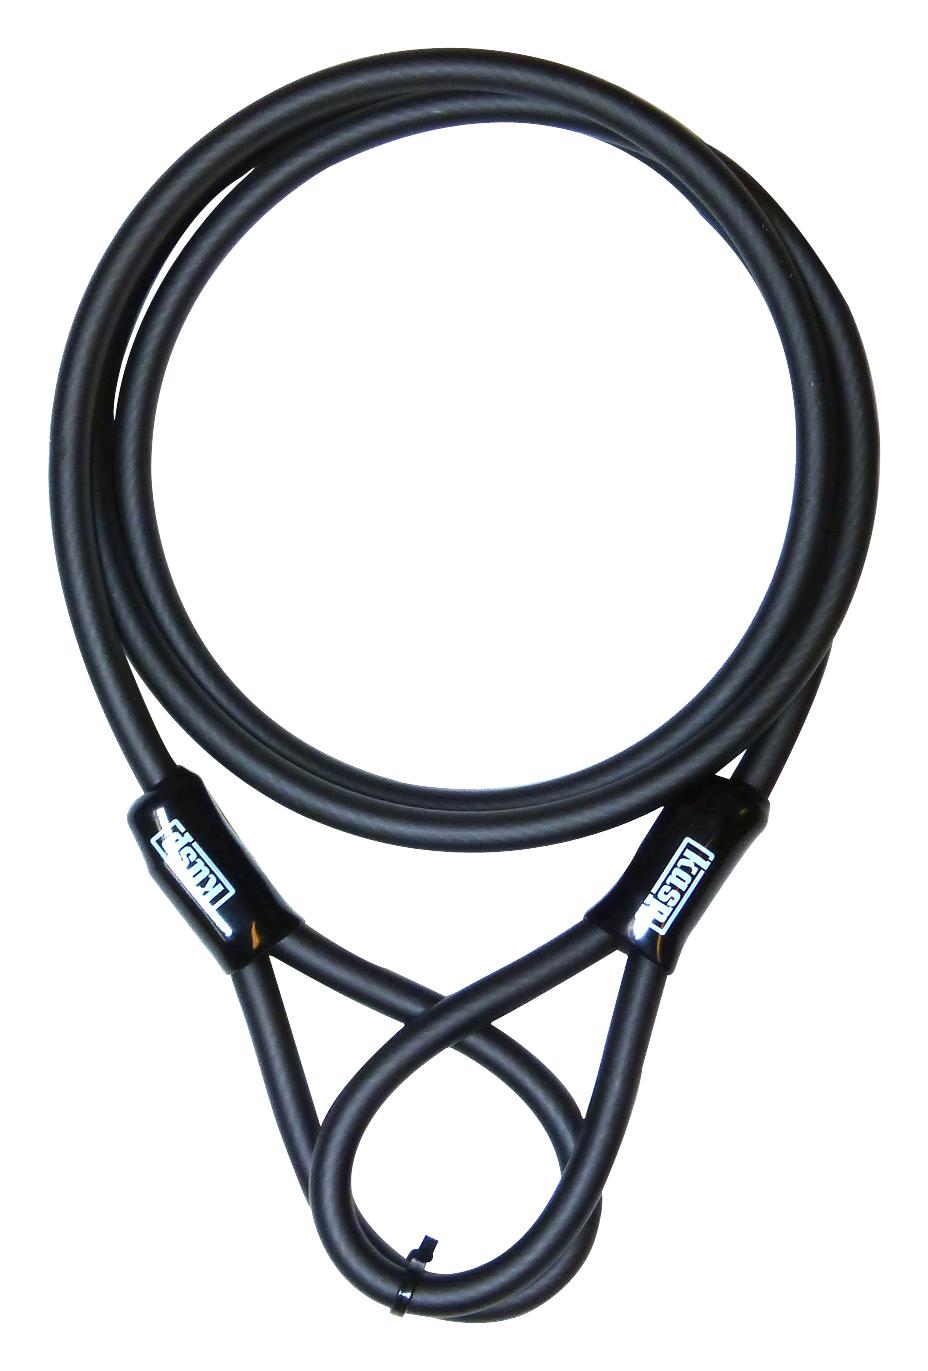 K4551018D DOUBLE LOOP SECURITY CABLE, 10 X 1800MM KASP SECURITY